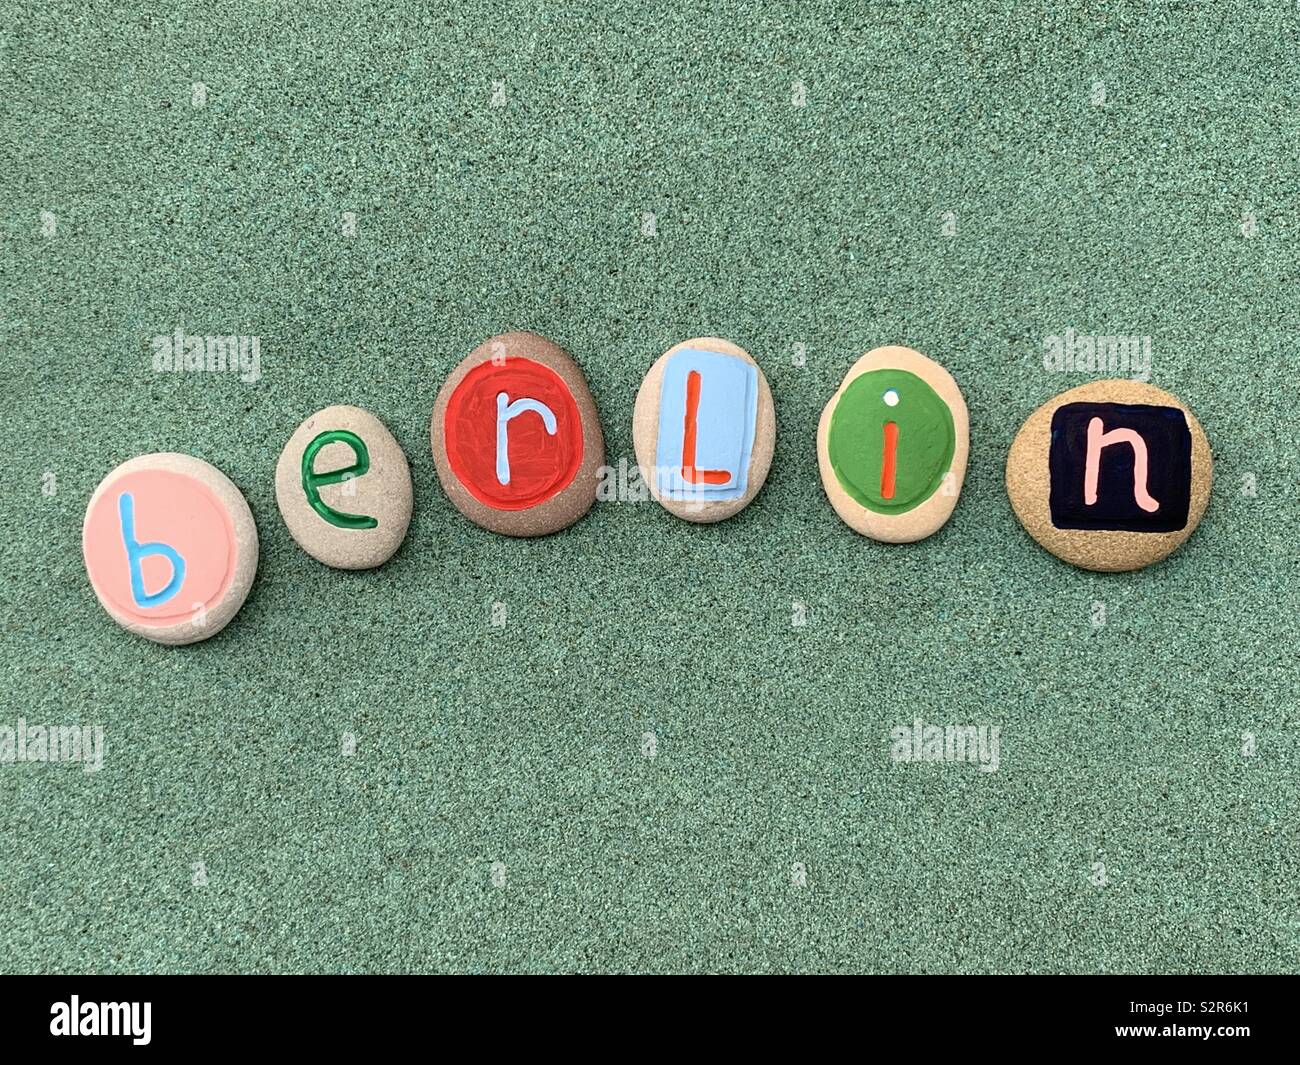 Berlin, capital city of Germany celebrated with a colored composition of stones over green sand Stock Photo